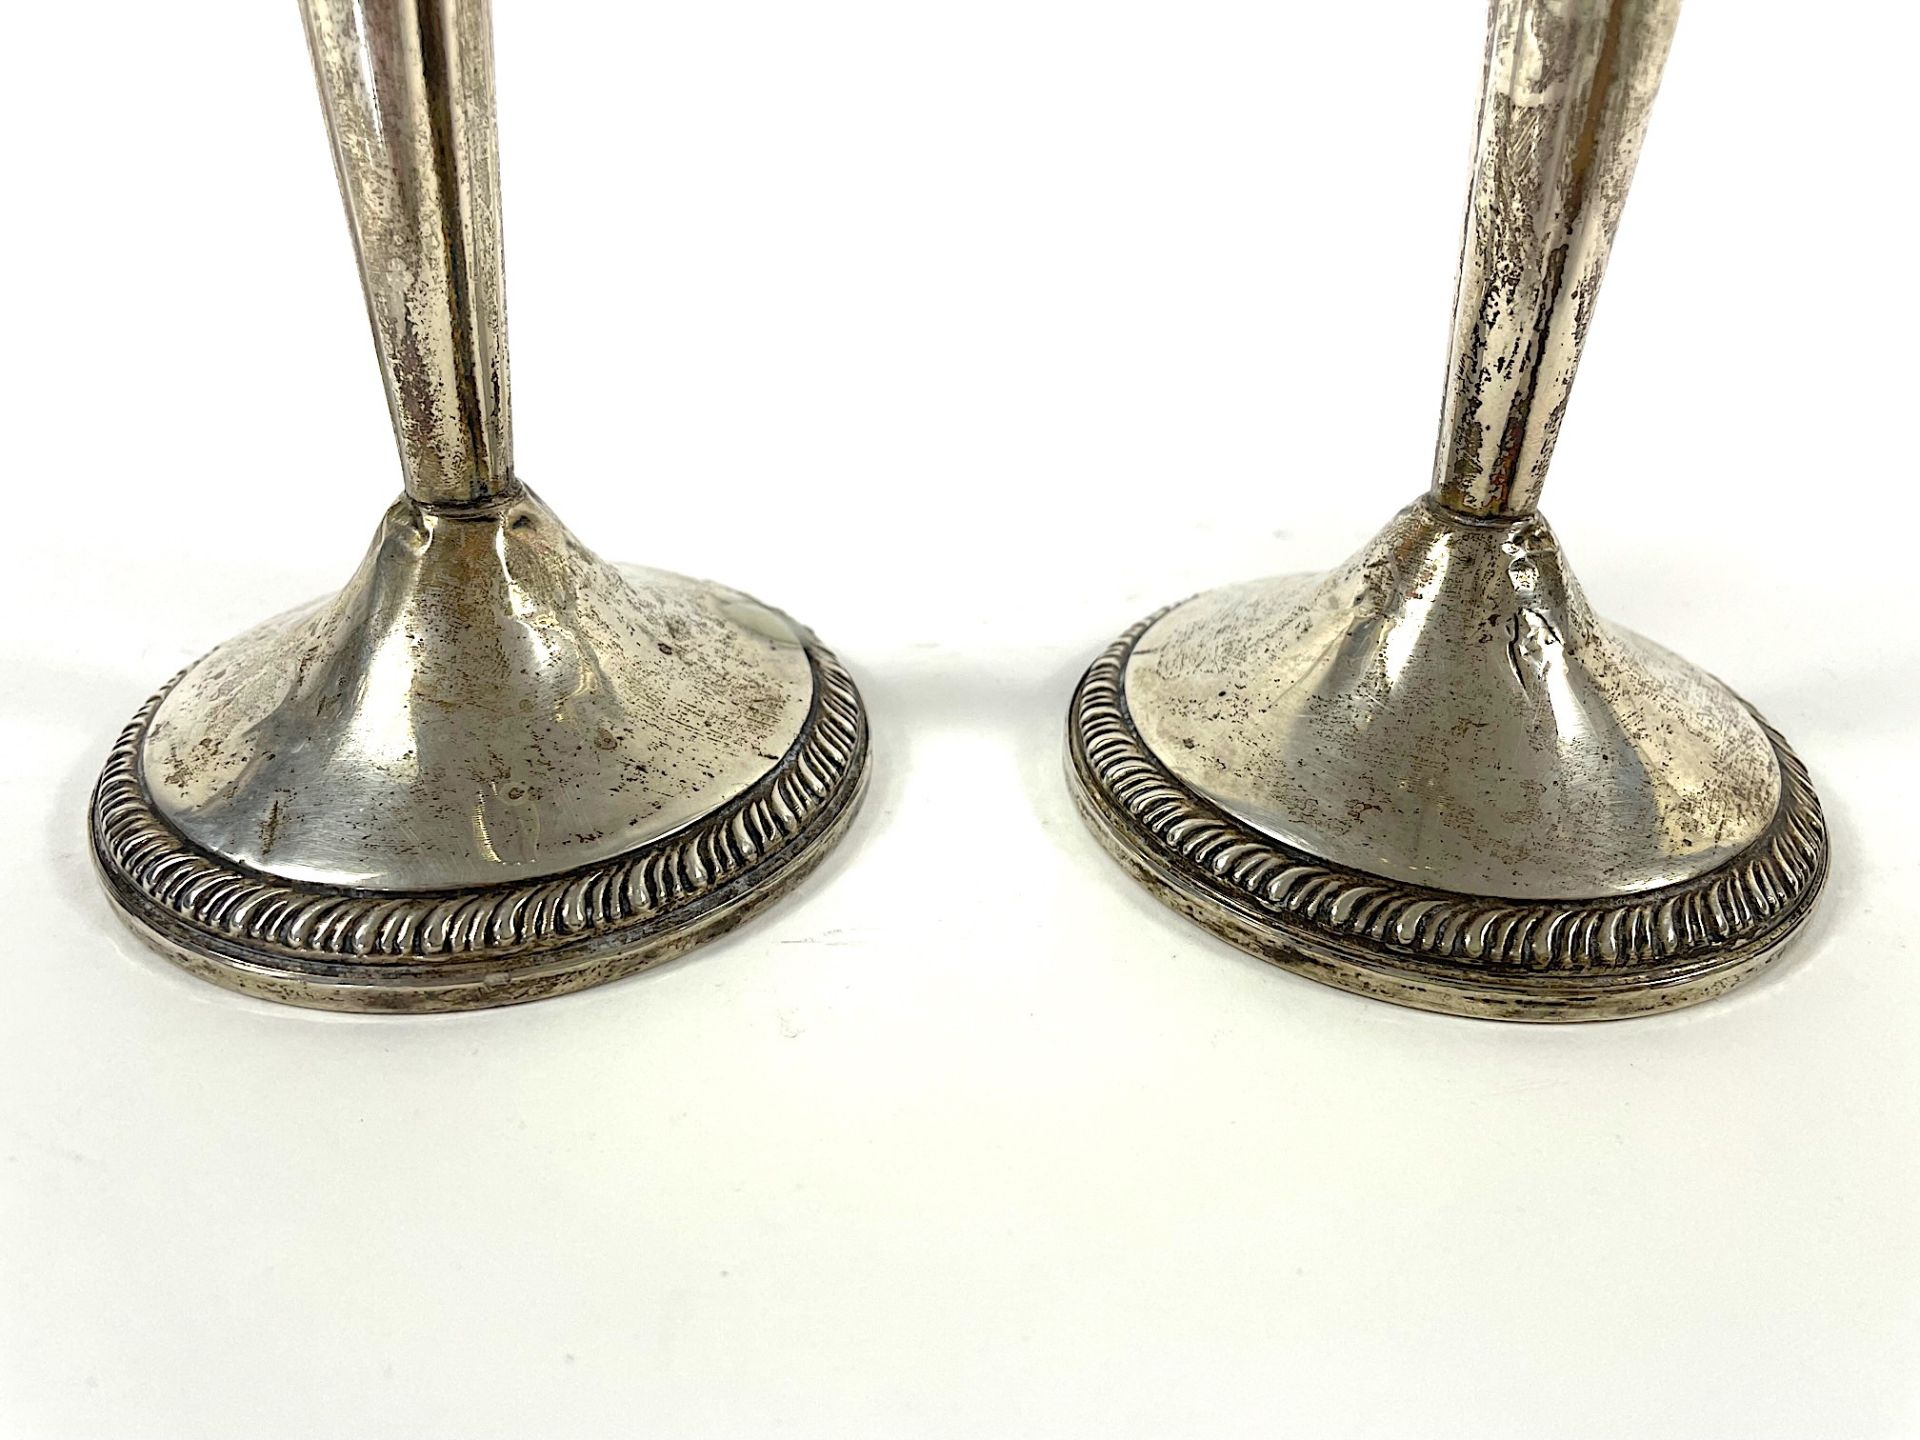 2 candlesticks in 925 silver - Image 8 of 11